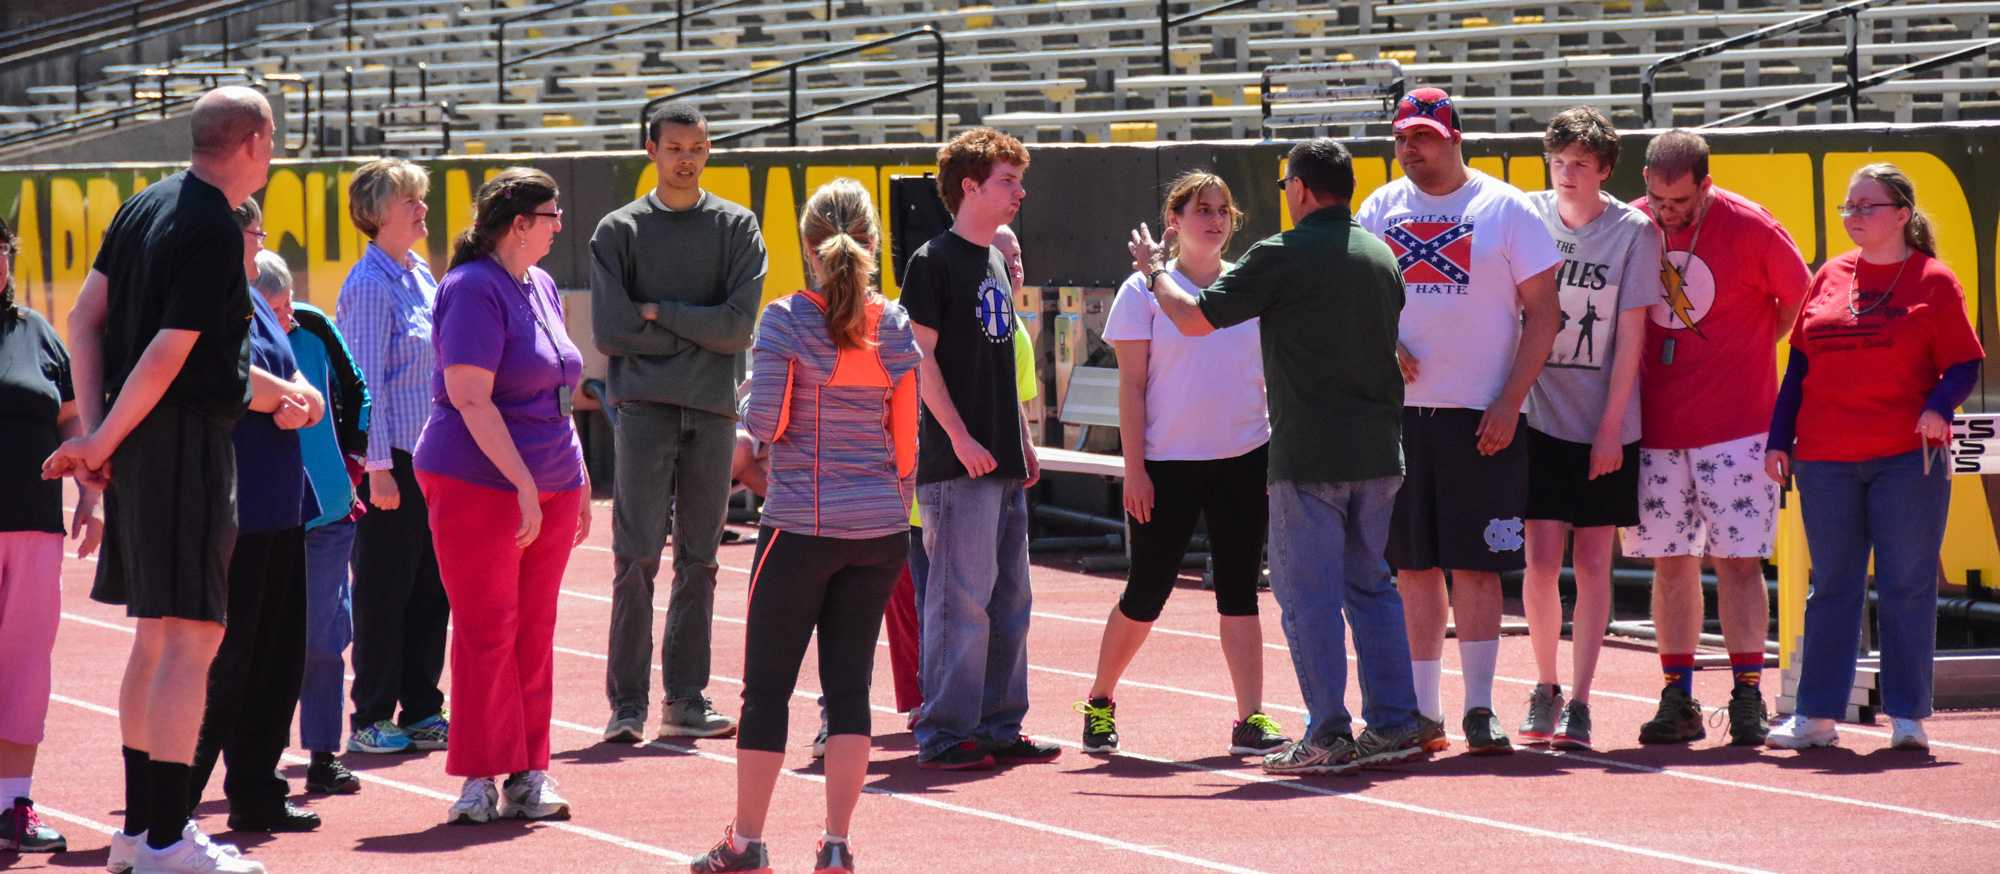 Keron Poteat instructs the Olympians in properly doing the walking and running races. Photo by Lee Sanderlin.